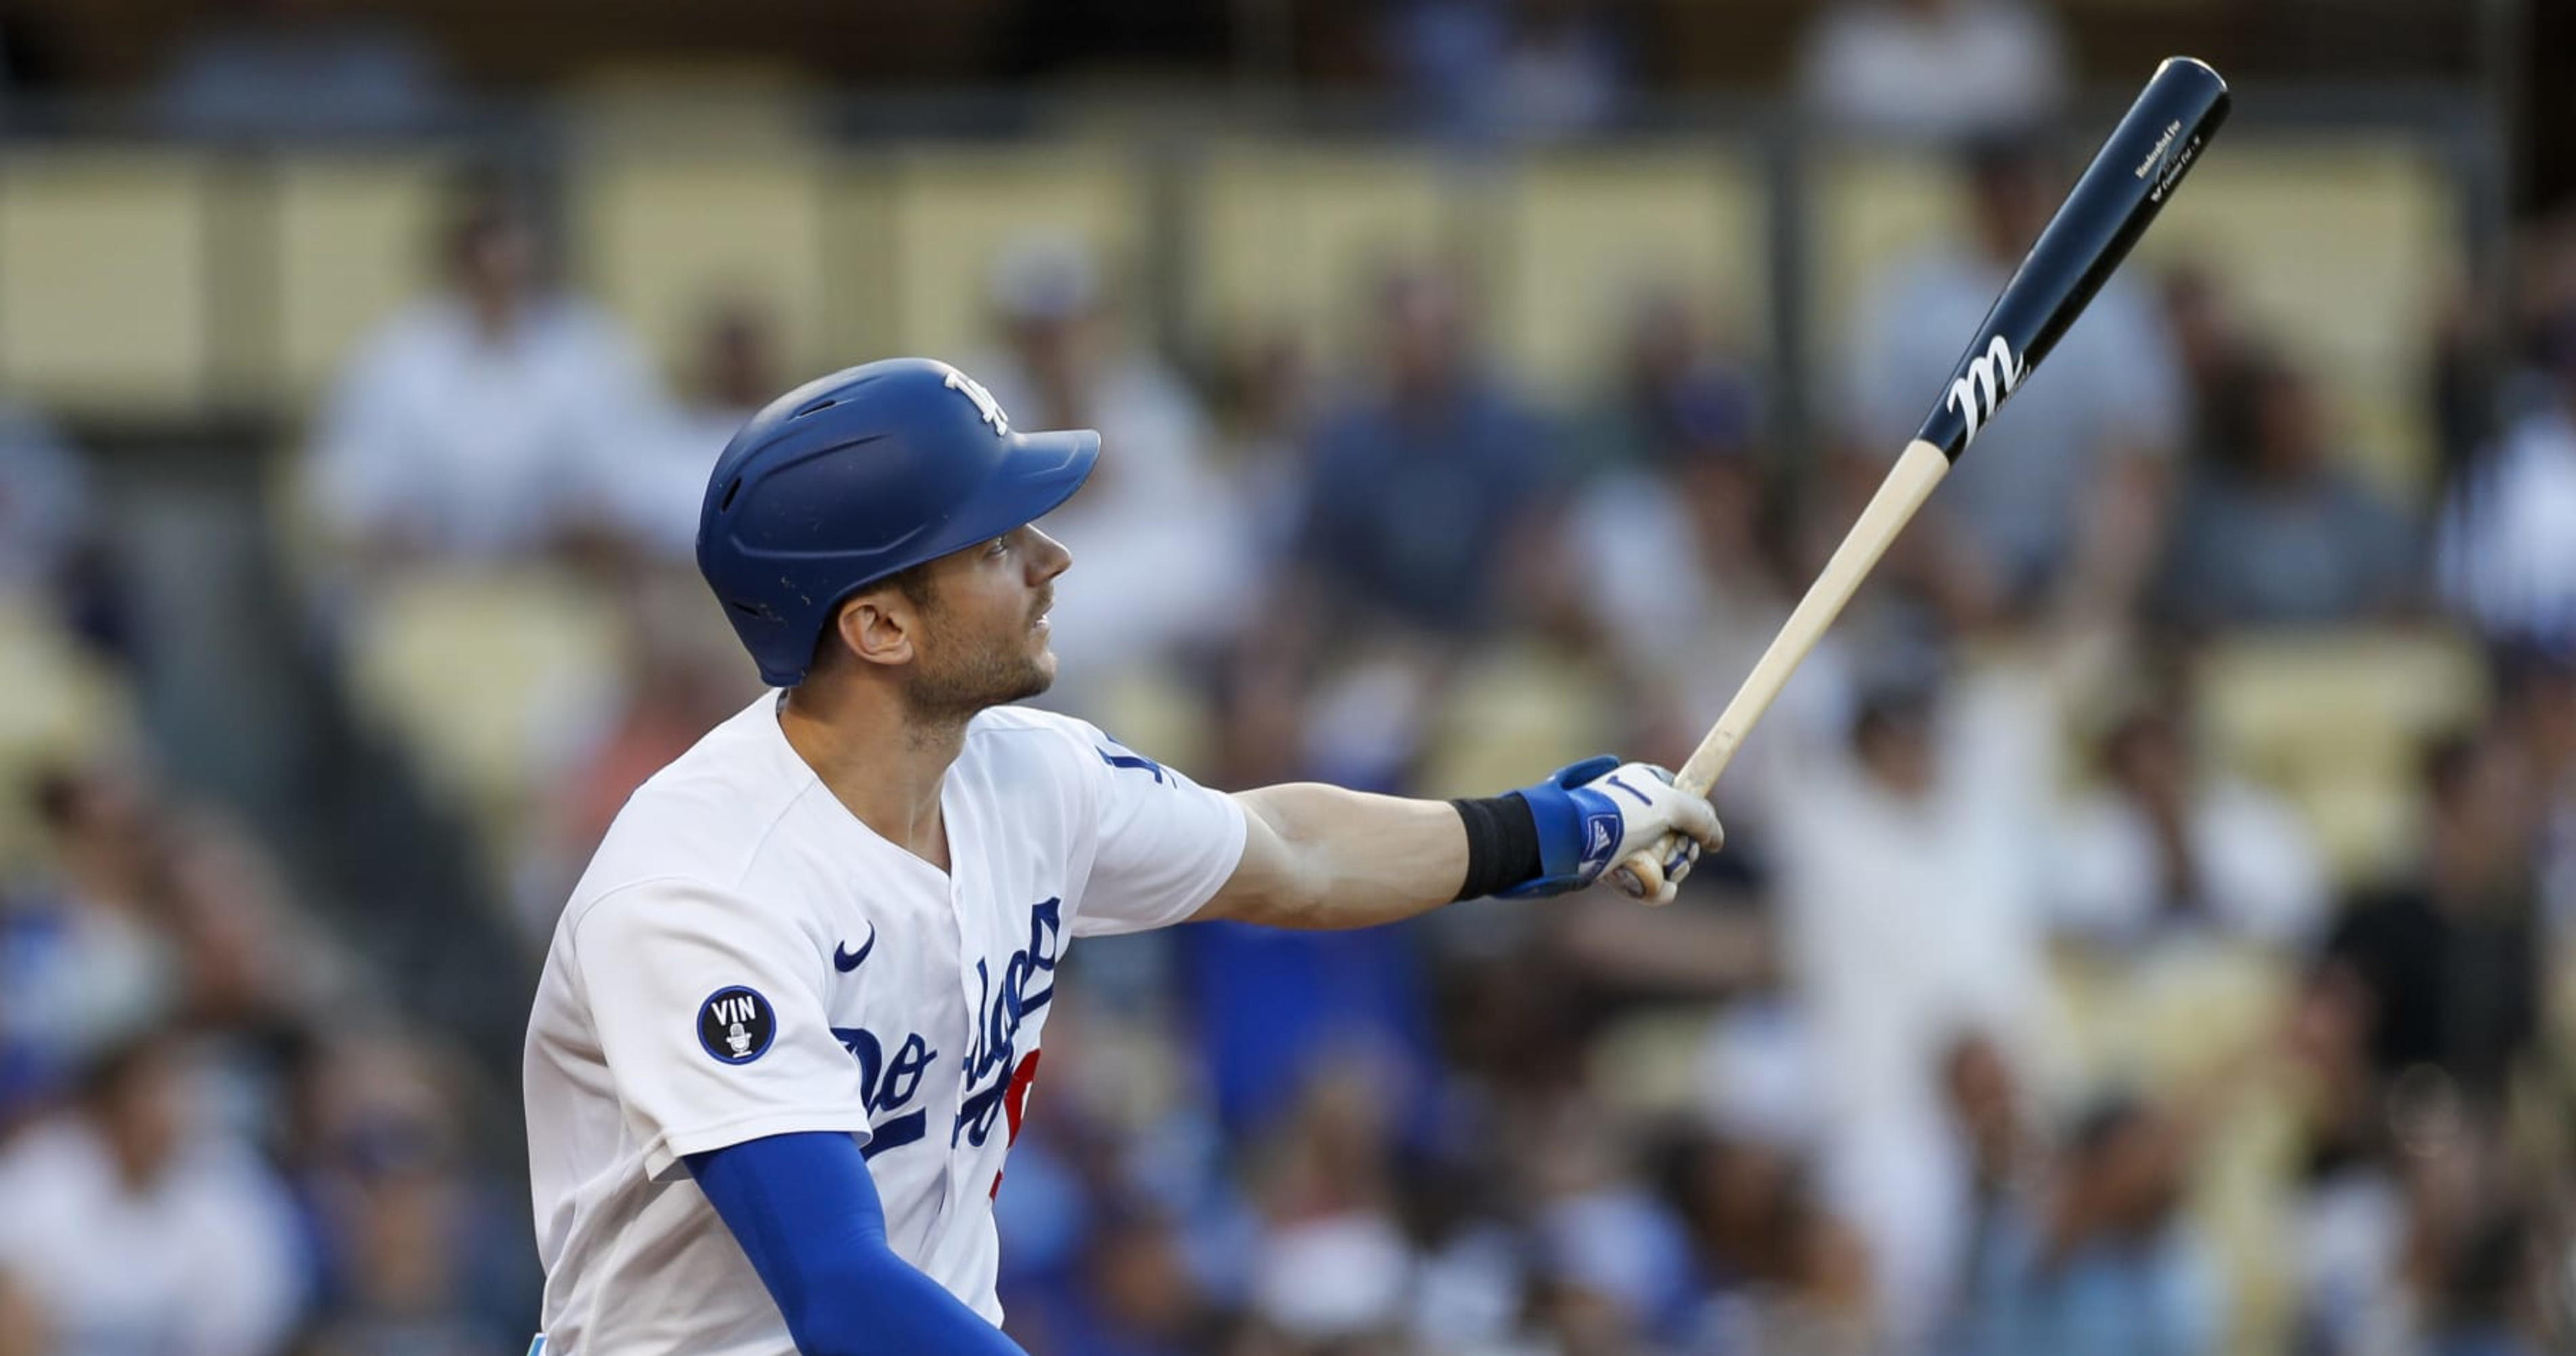 Dodgers News: Trea Turner Enjoying Opportunity To Play With Albert Pujols